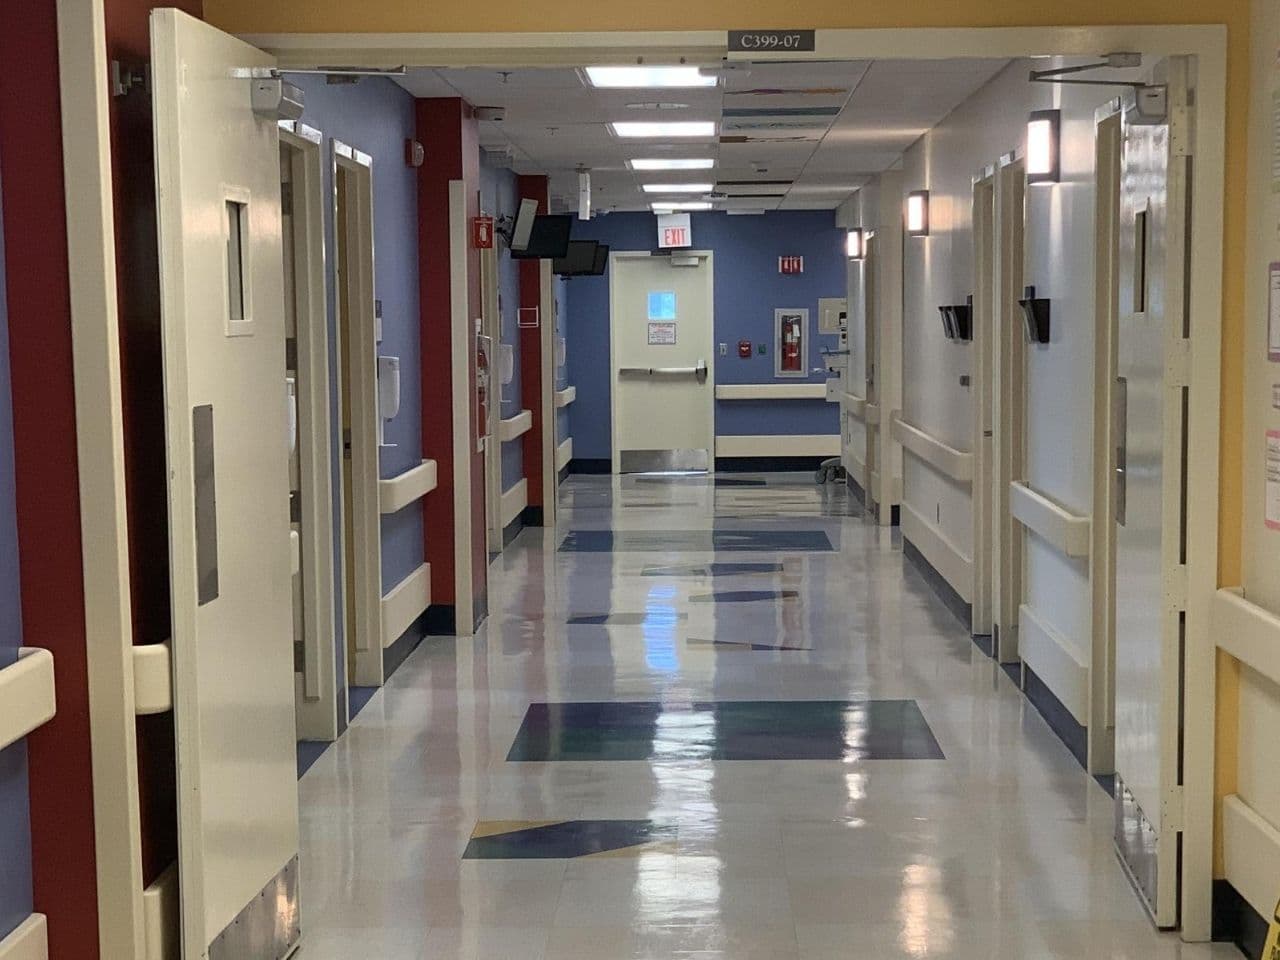 A hallway on the unit has walls painted in red, blue, and yellow.